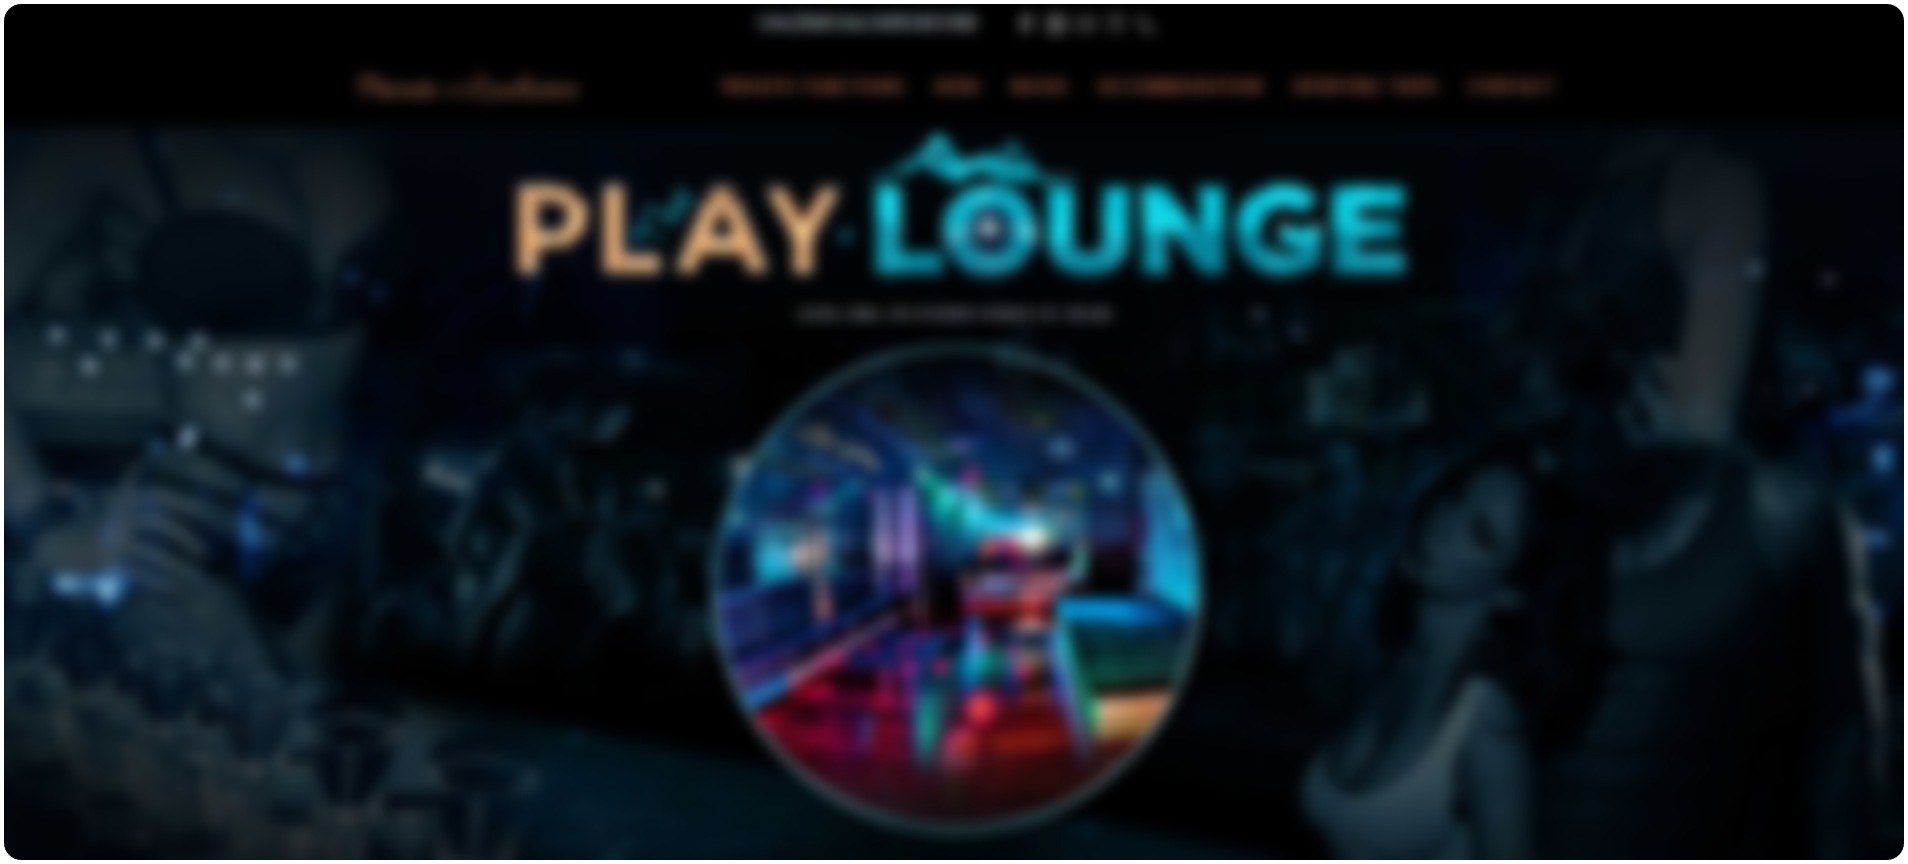 the play lounge